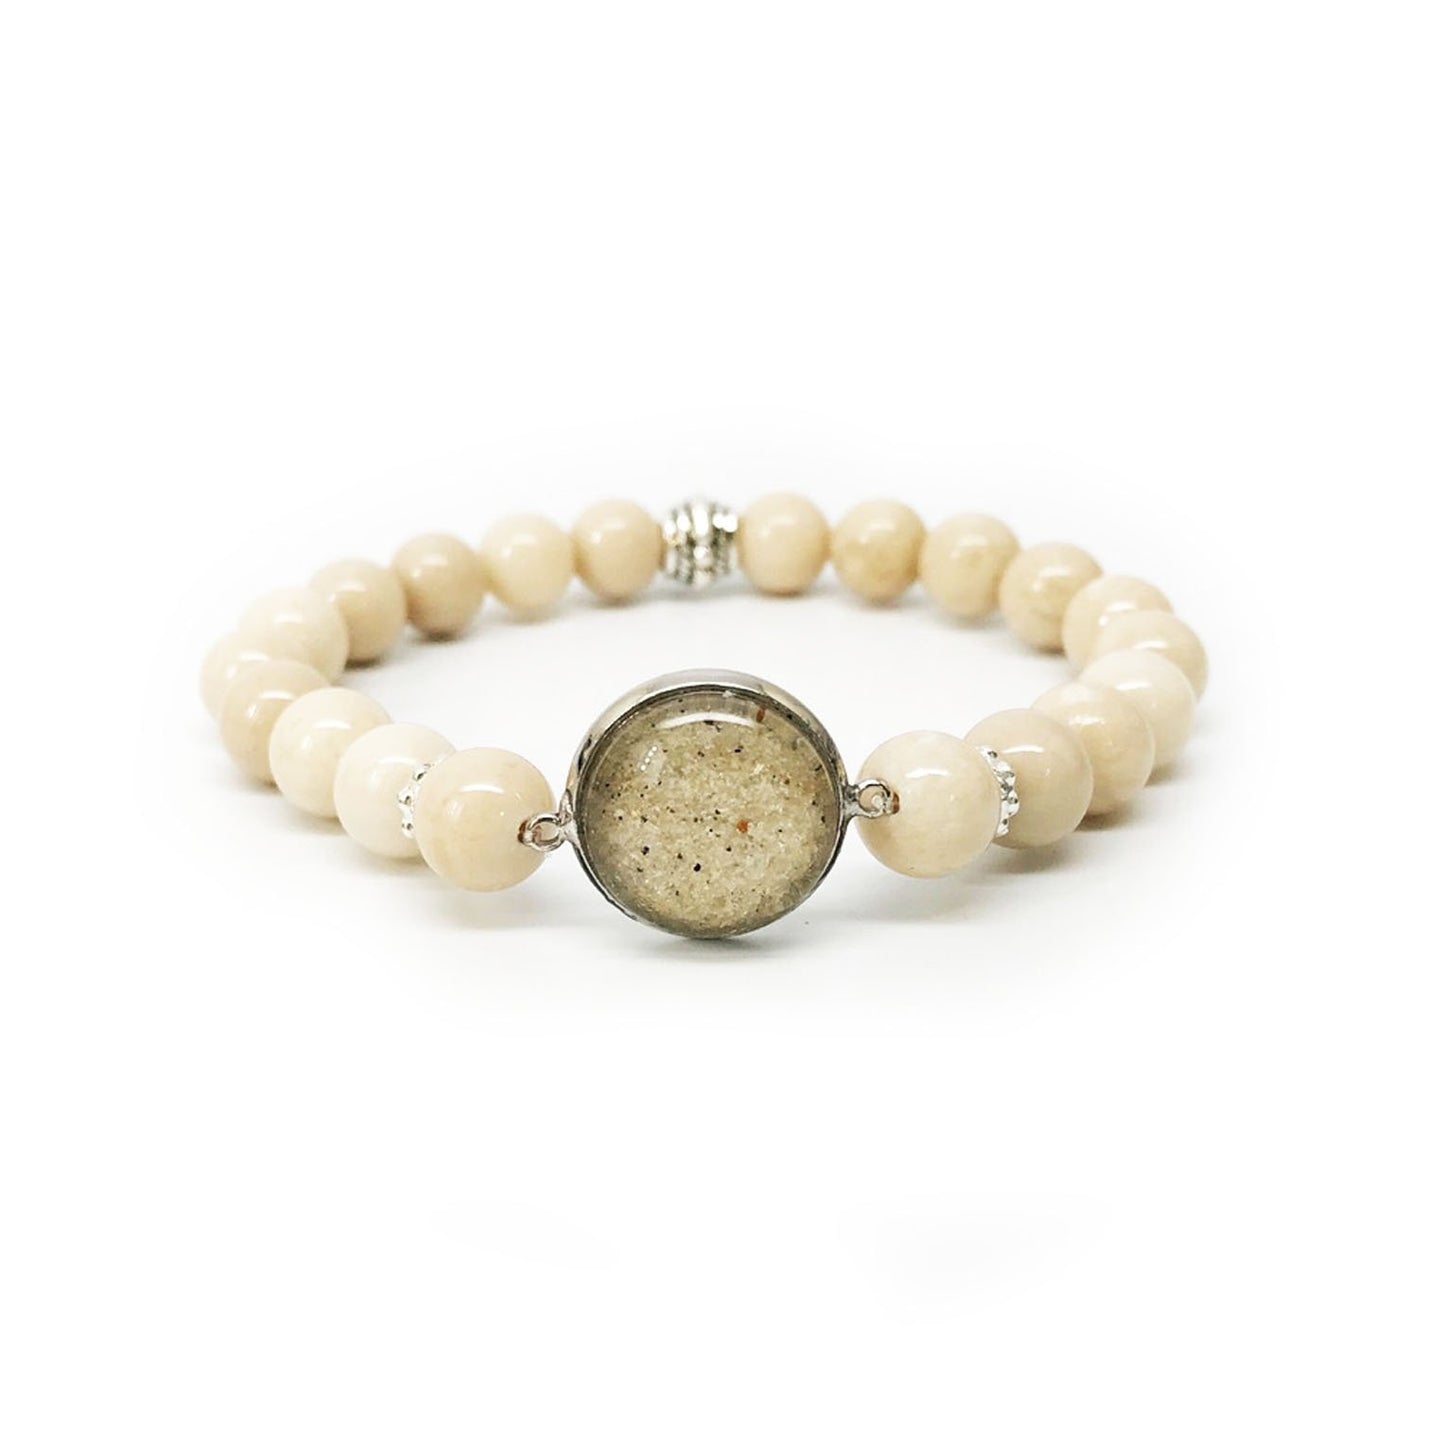 Buy Natural Howlite bracelet Online From Premium Crystal Store at Best  Price - The Miracle Hub